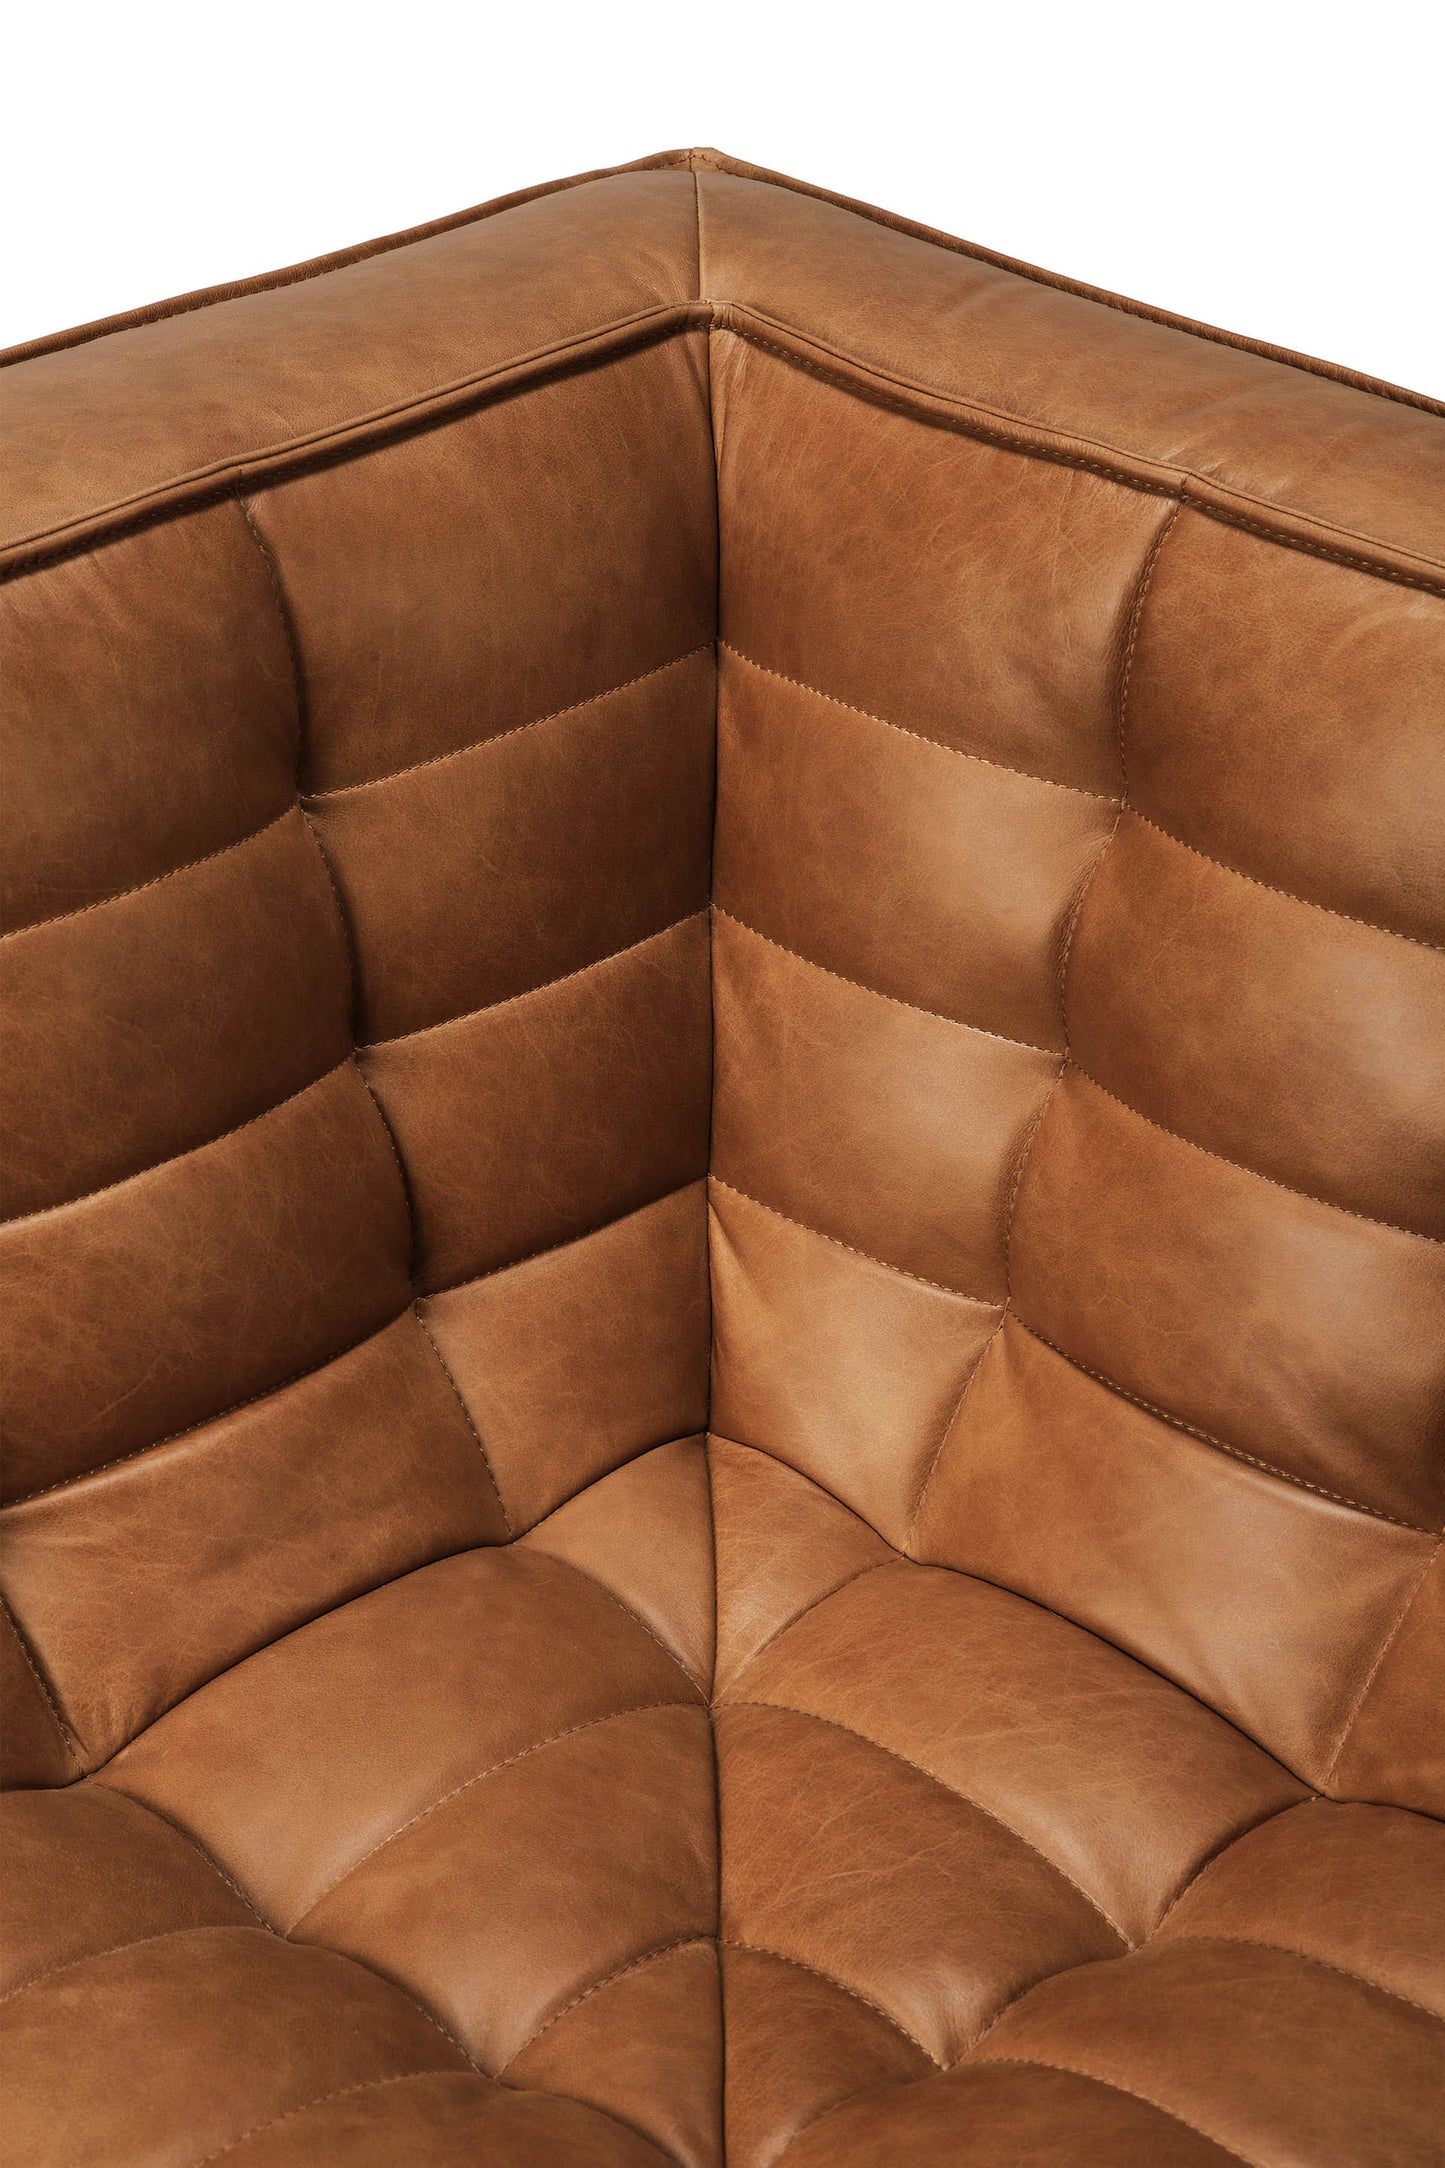 N701 Ethnicraft Slouch Sofa in Old Saddle Leather available from Make Your House A Home, Bendigo, Victoria, Australia